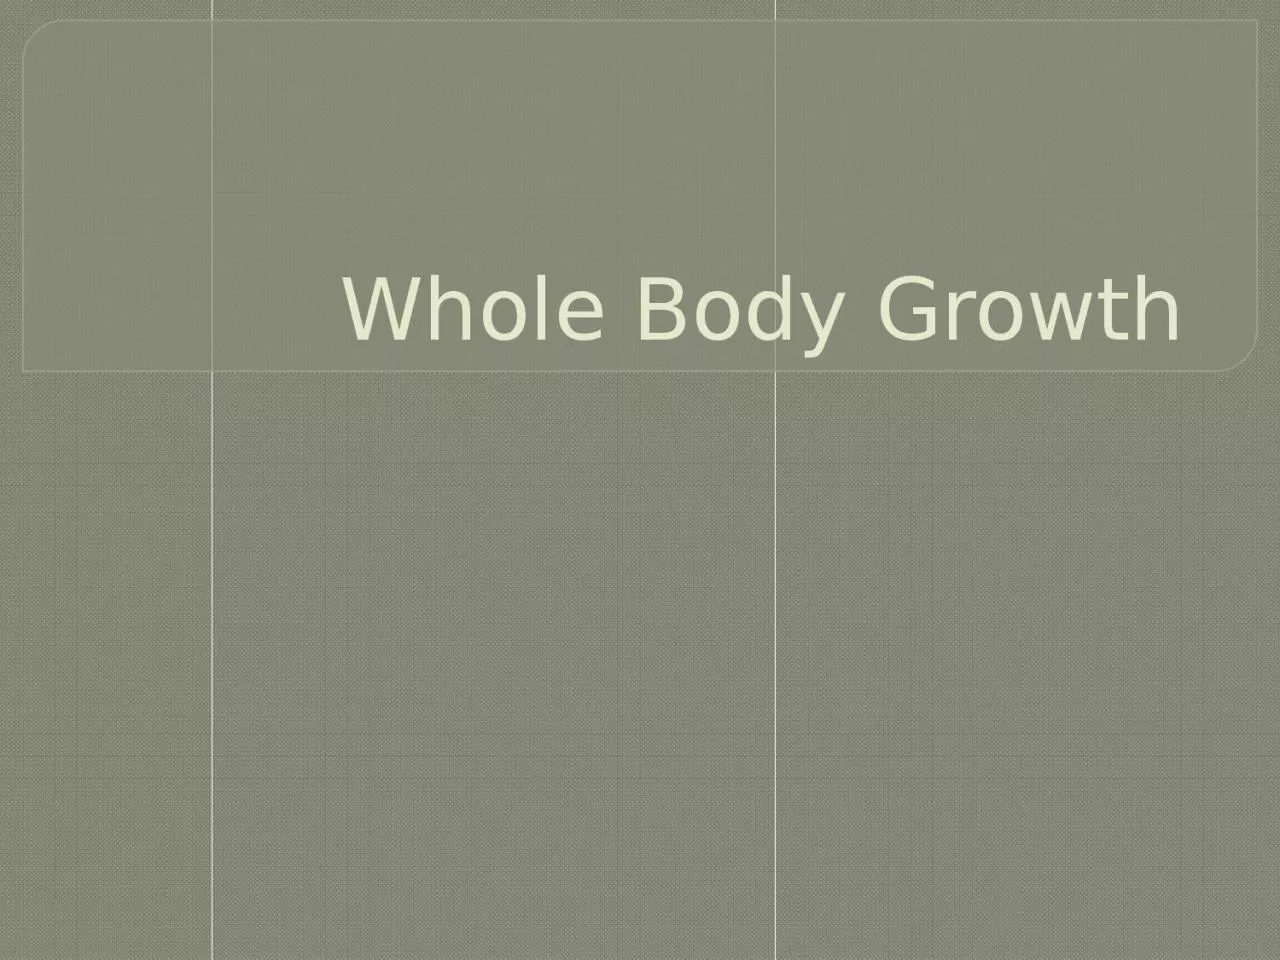 Whole Body Growth Objectives